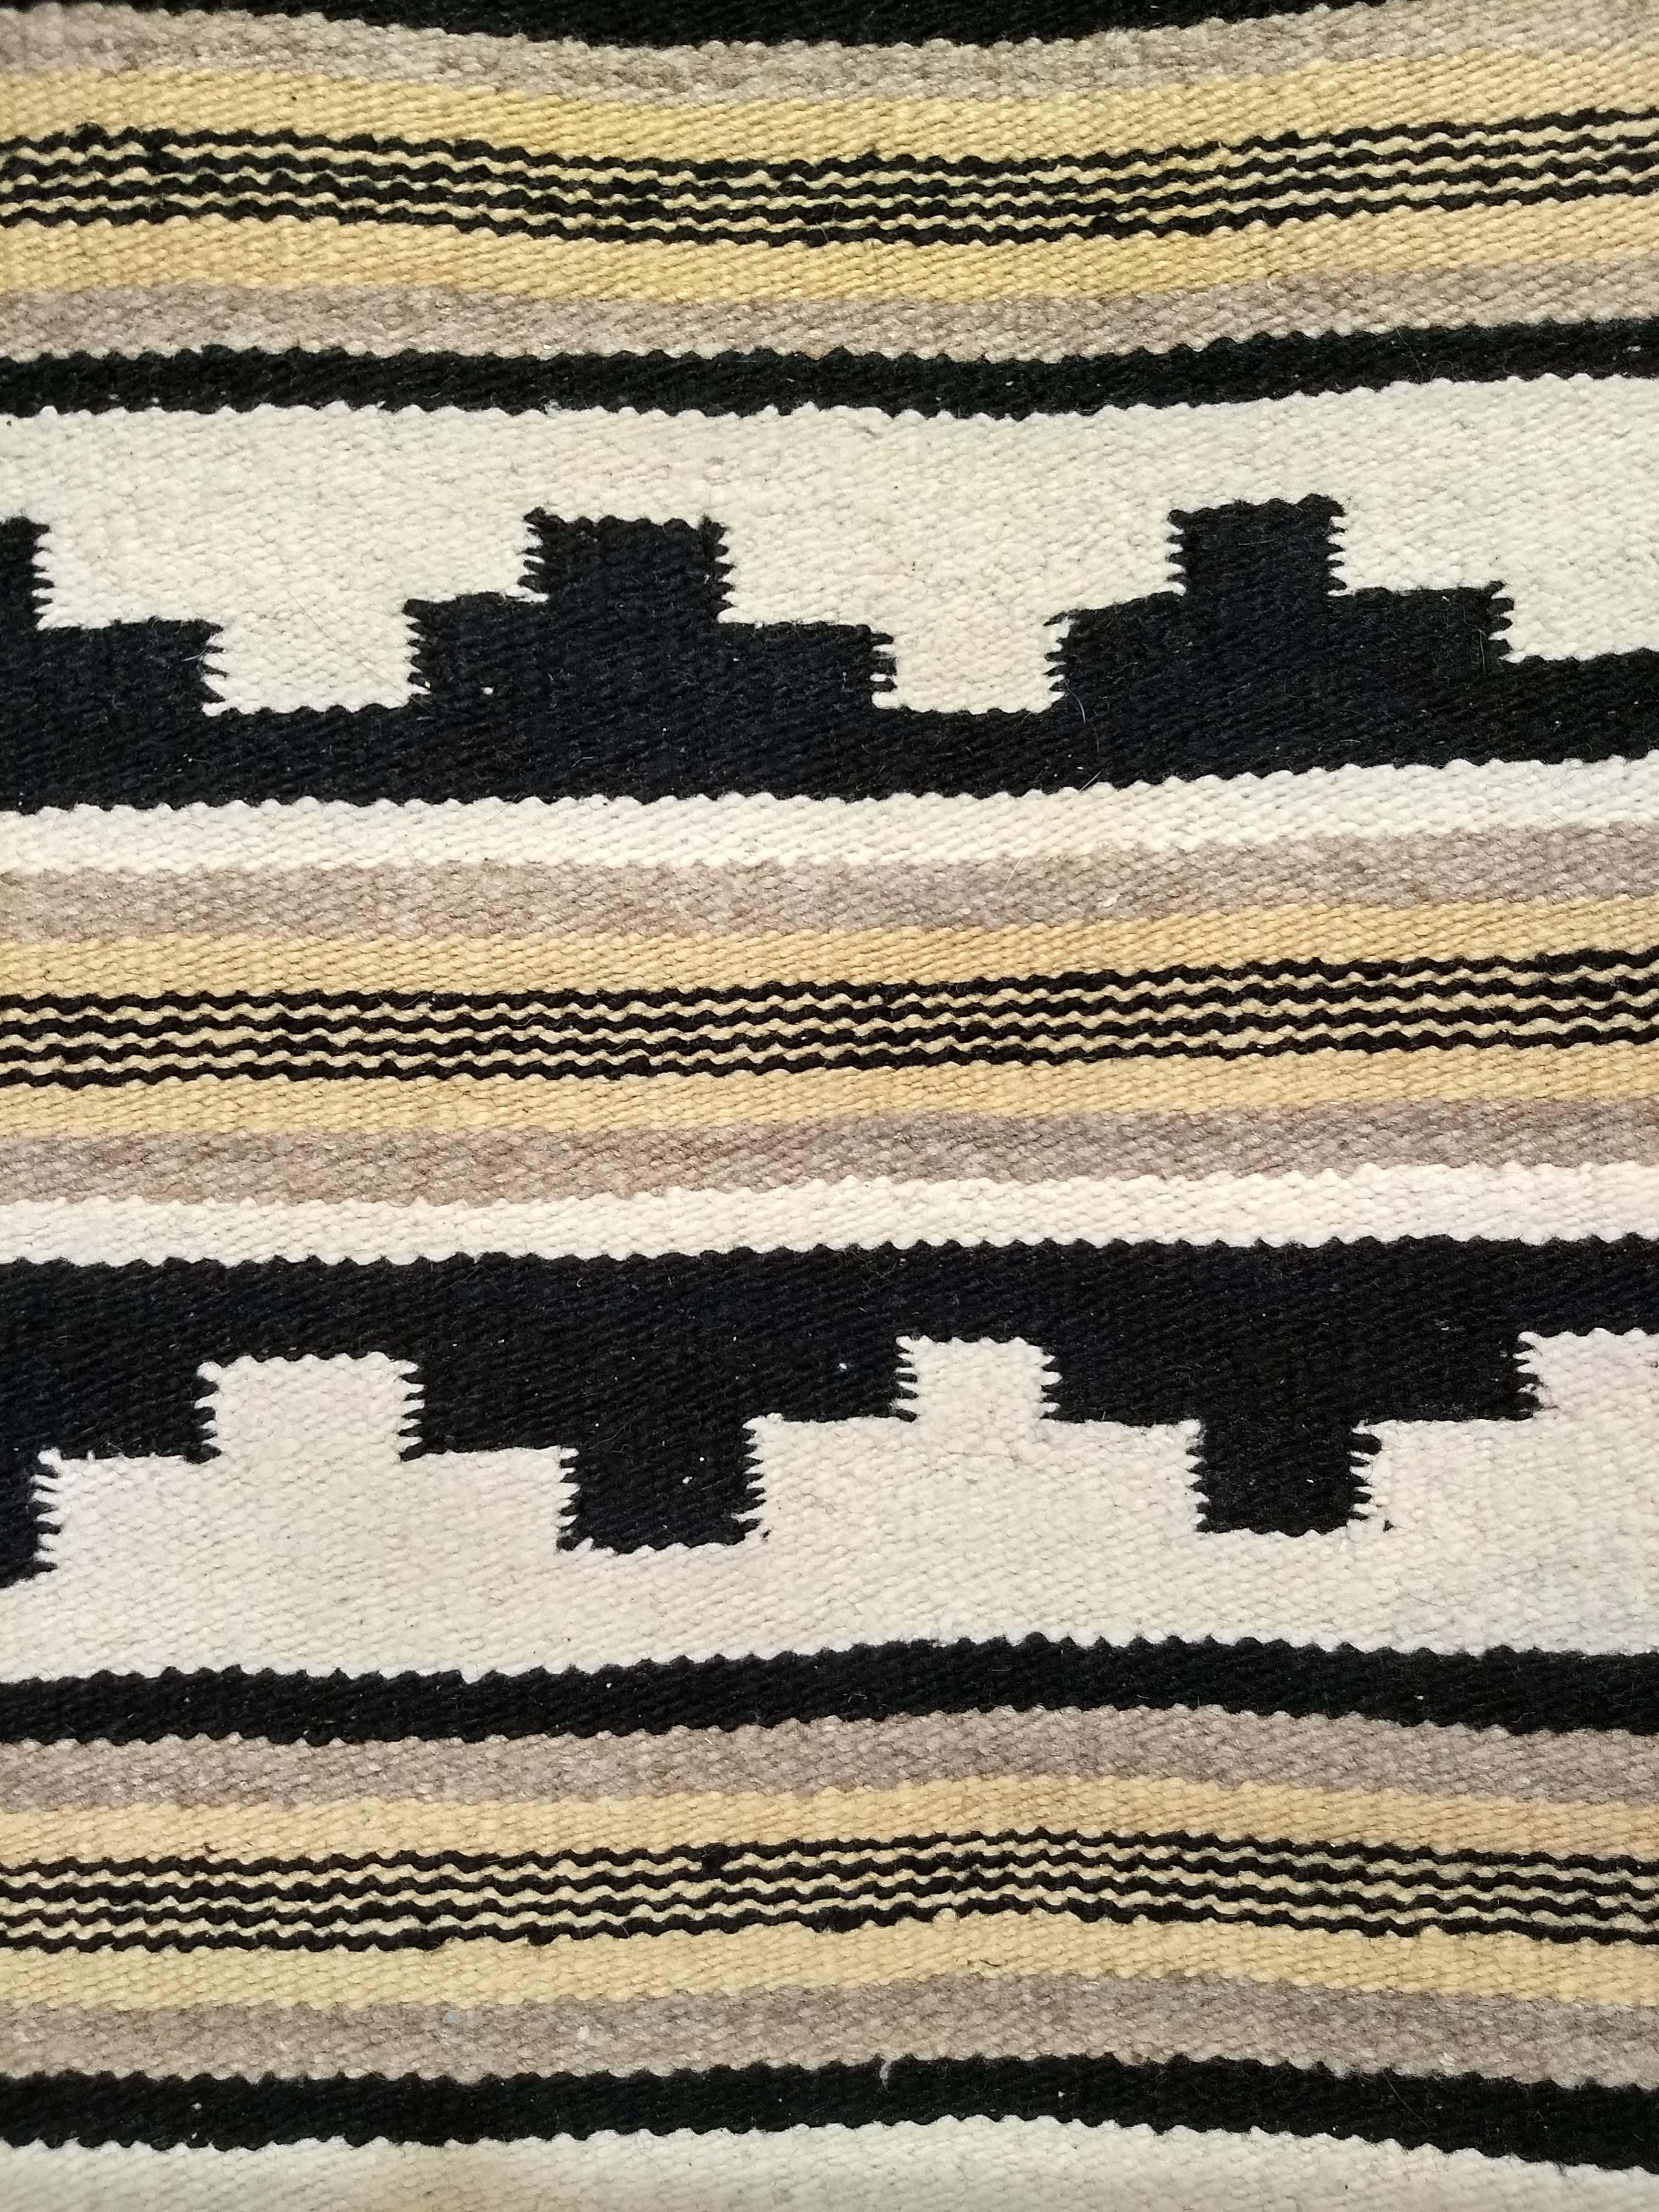 Vintage American Navajo Rug in A Canyon Pattern in Ivory, Black, Cappuccino In Good Condition For Sale In Barrington, IL